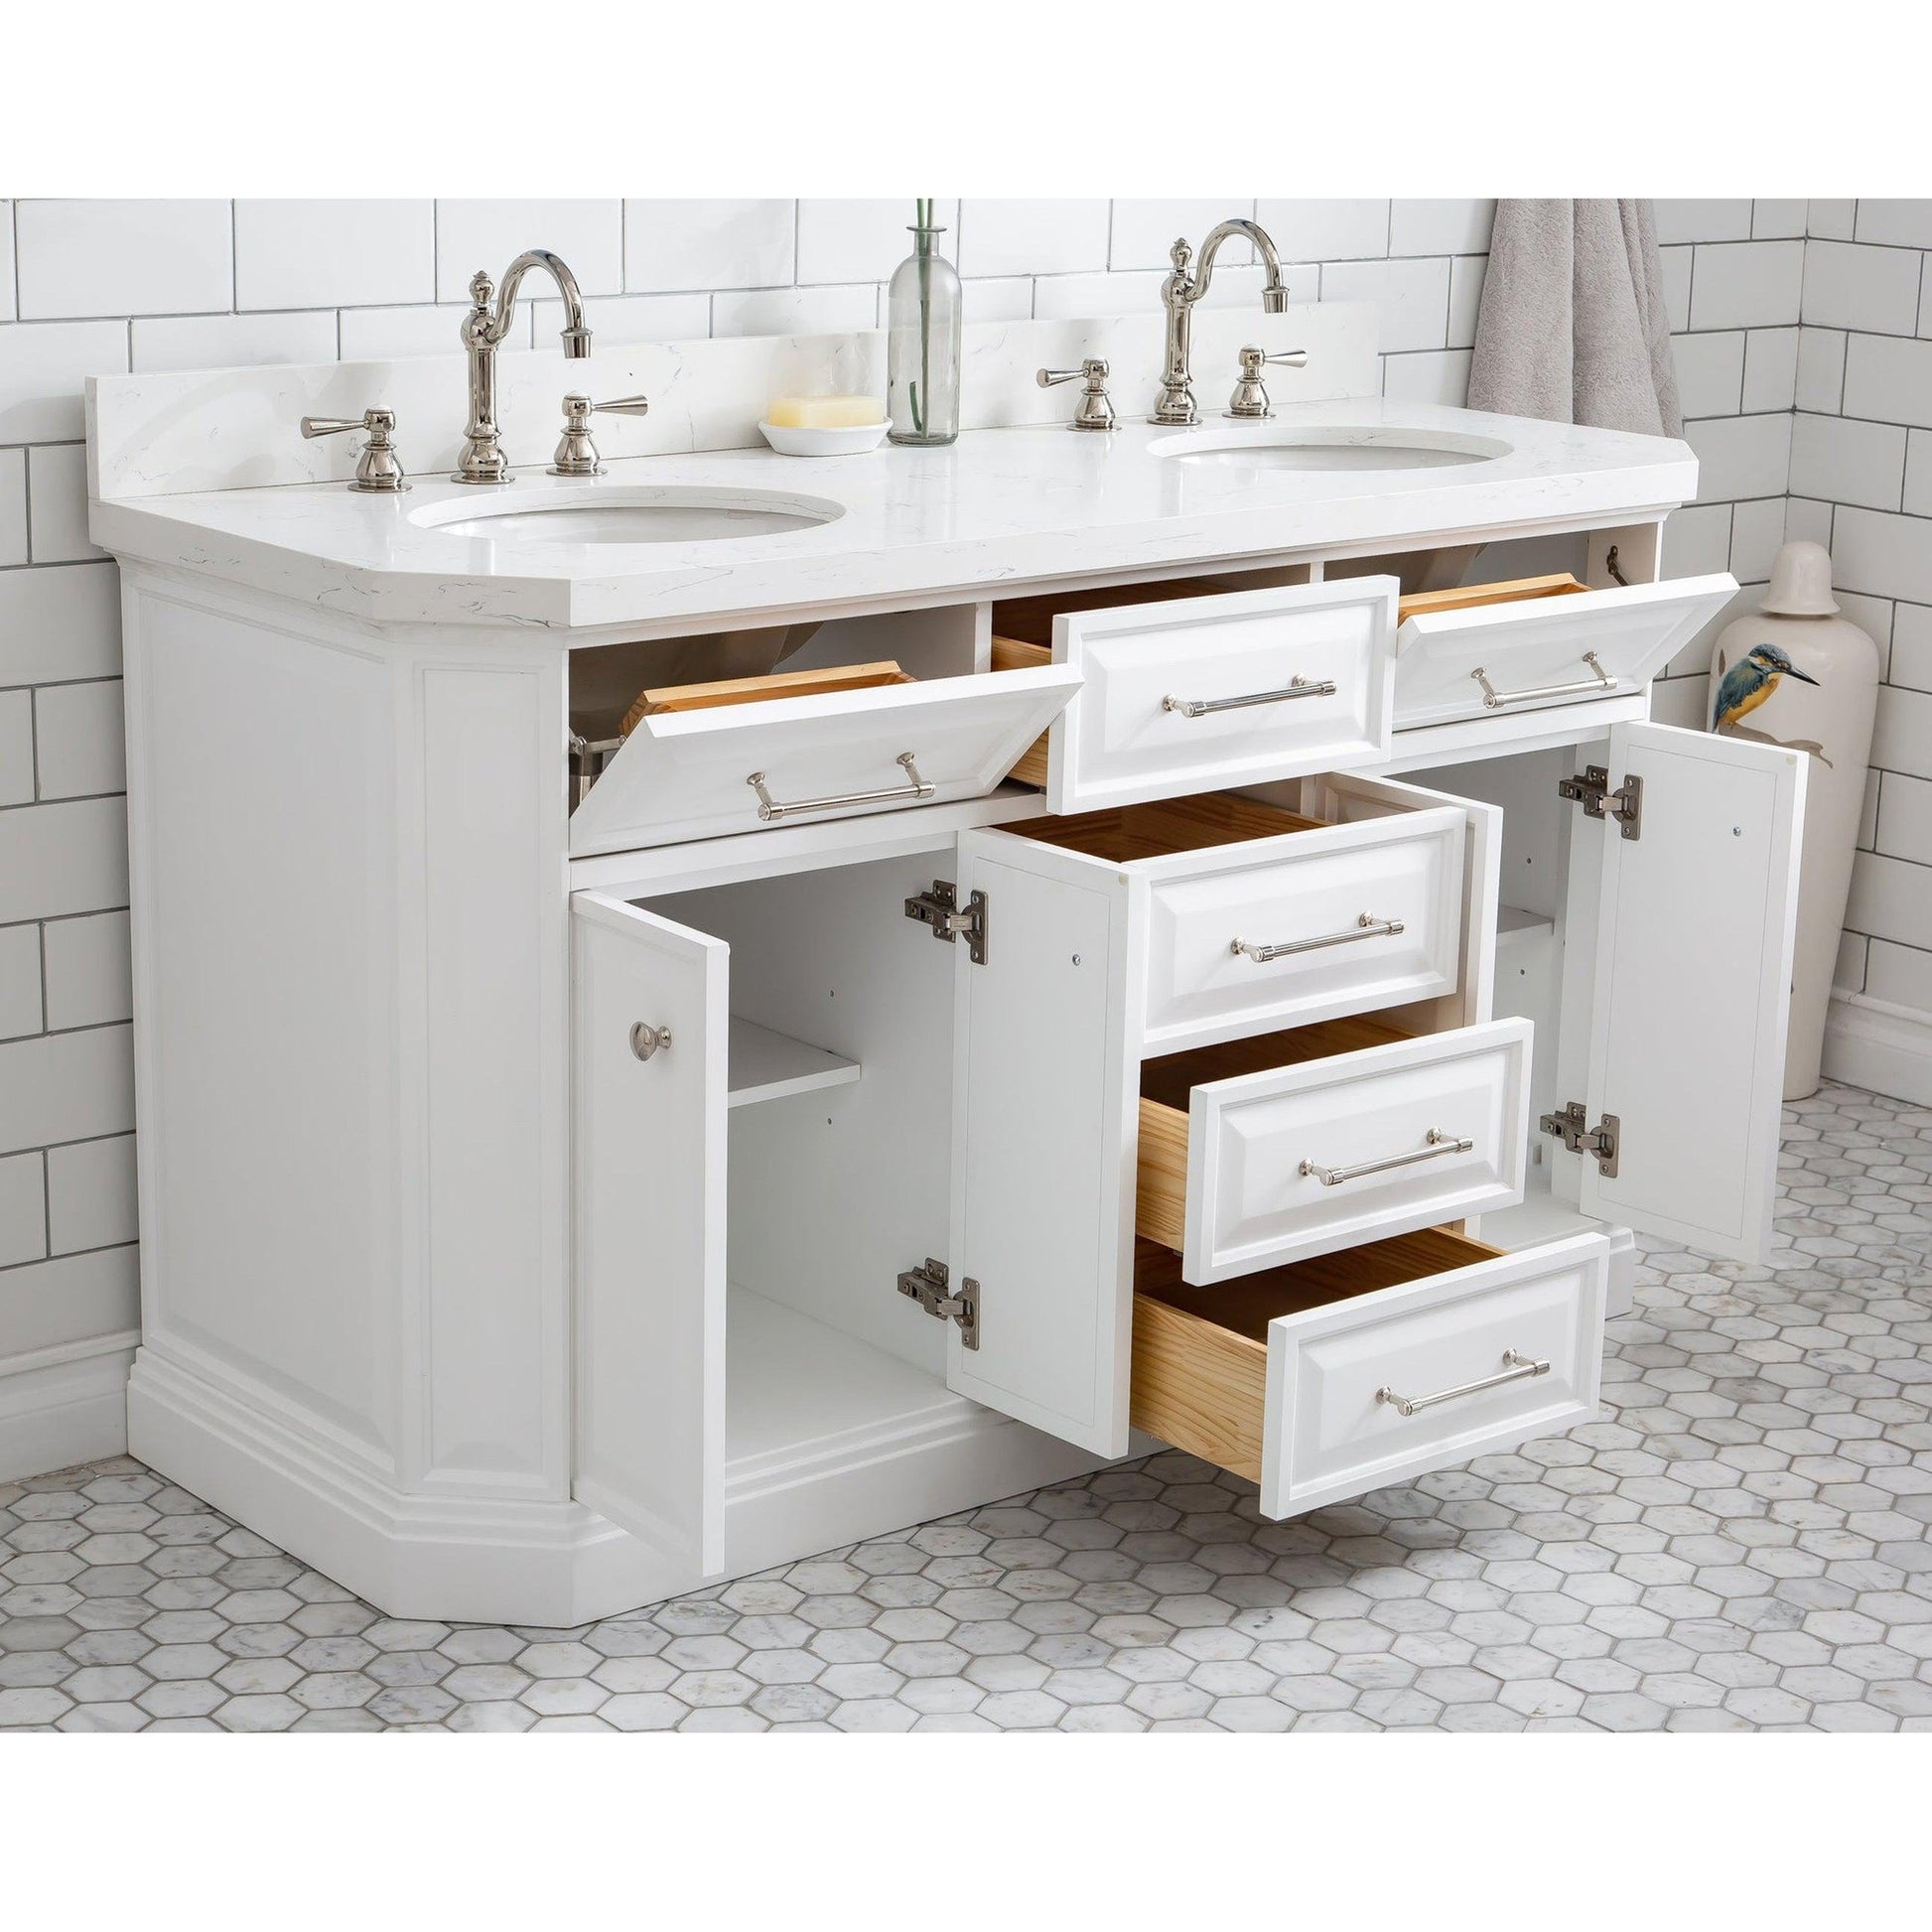 Water Creation Palace 60" Quartz Carrara Pure White Bathroom Vanity Set With Hardware And F2-0012 Faucets, Mirror in Polished Nickel (PVD) Finish